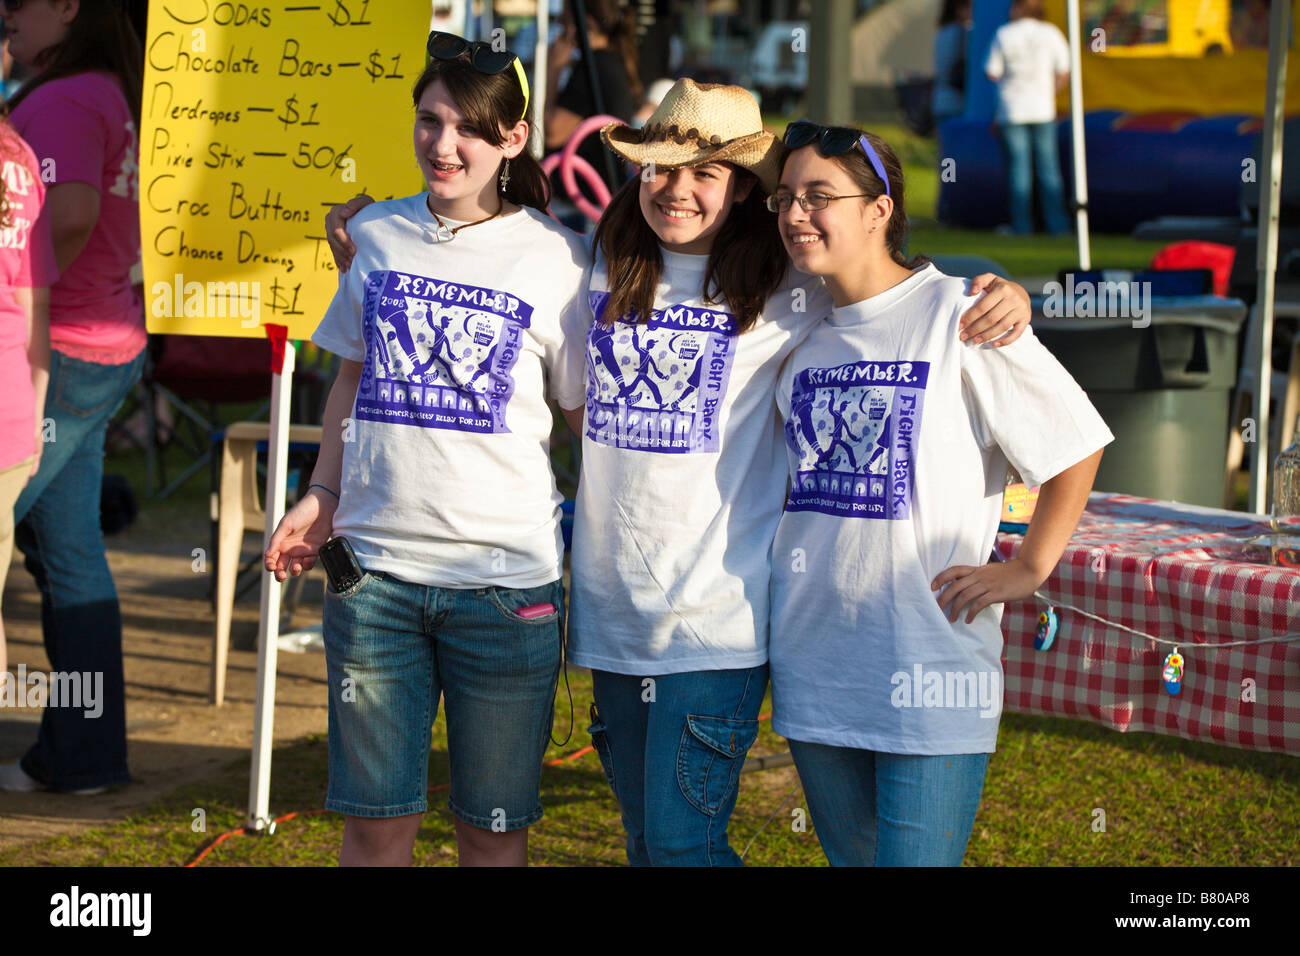 Cancer survivors participating in American Cancer Society's Relay for Life fund raising event in Ocala, Florida, USA Stock Photo